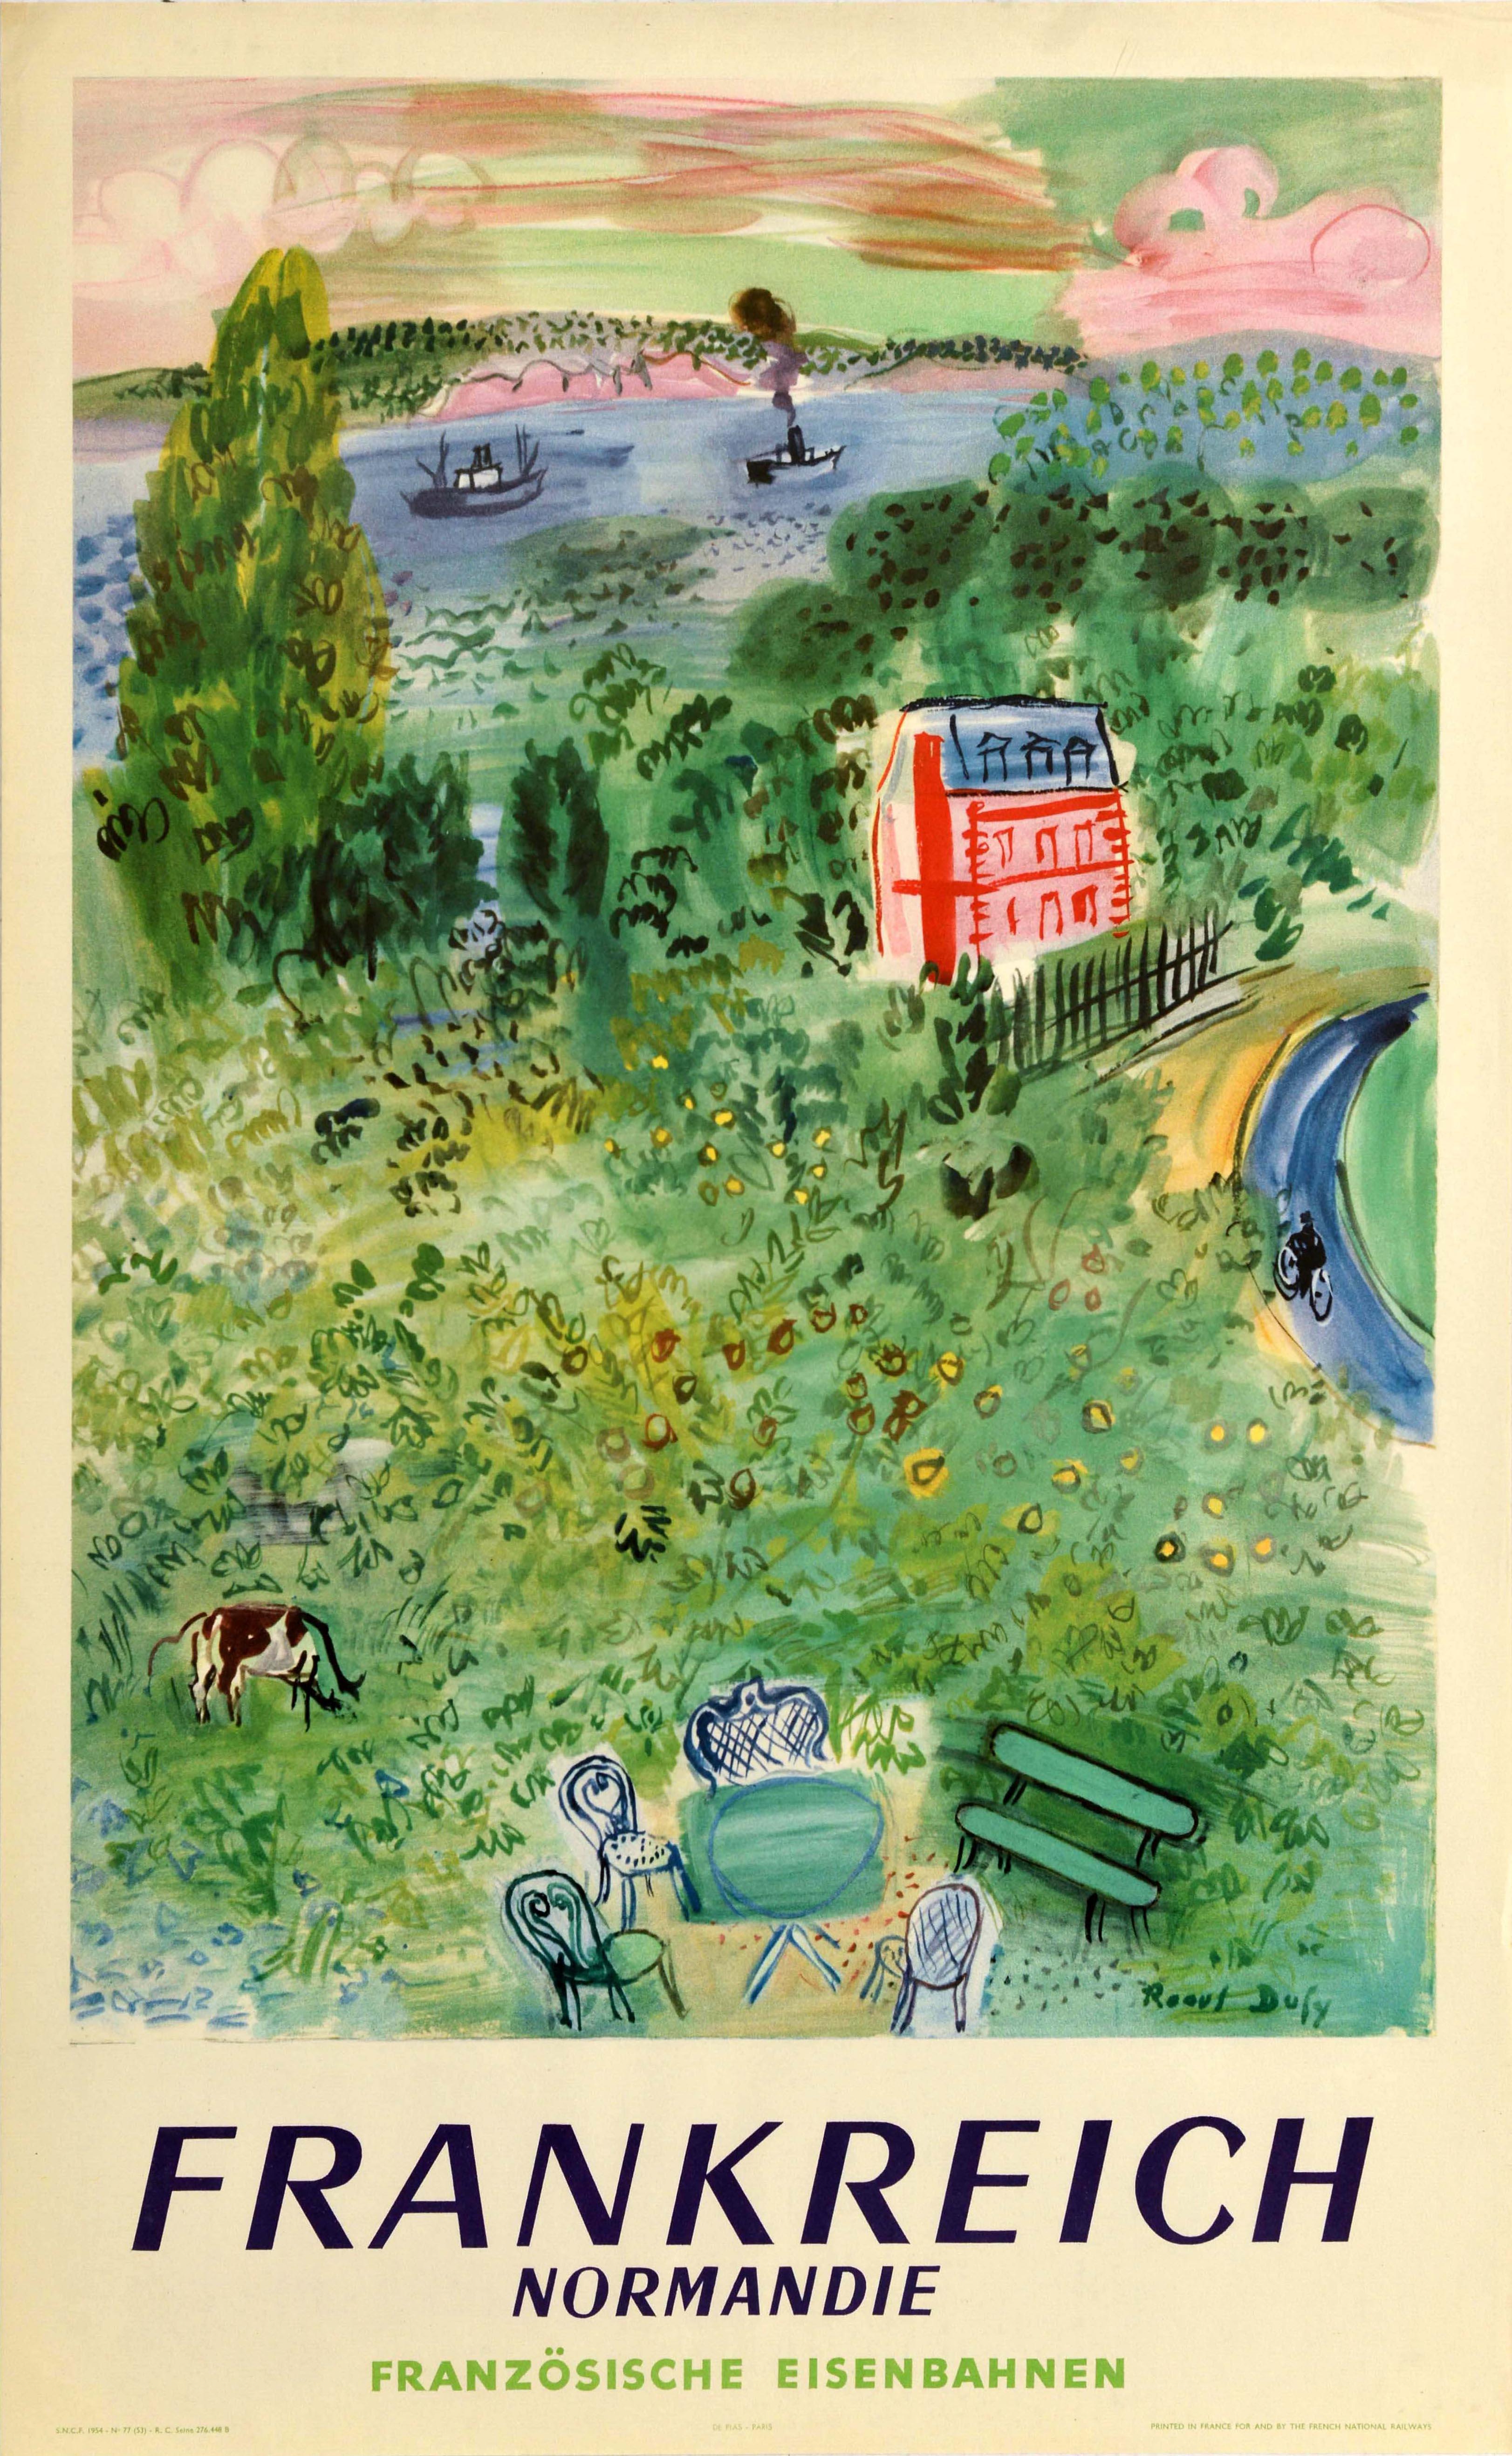 Raoul Dufy Print - Original Vintage French Railways Travel Poster Normandie Normandy France SNCF